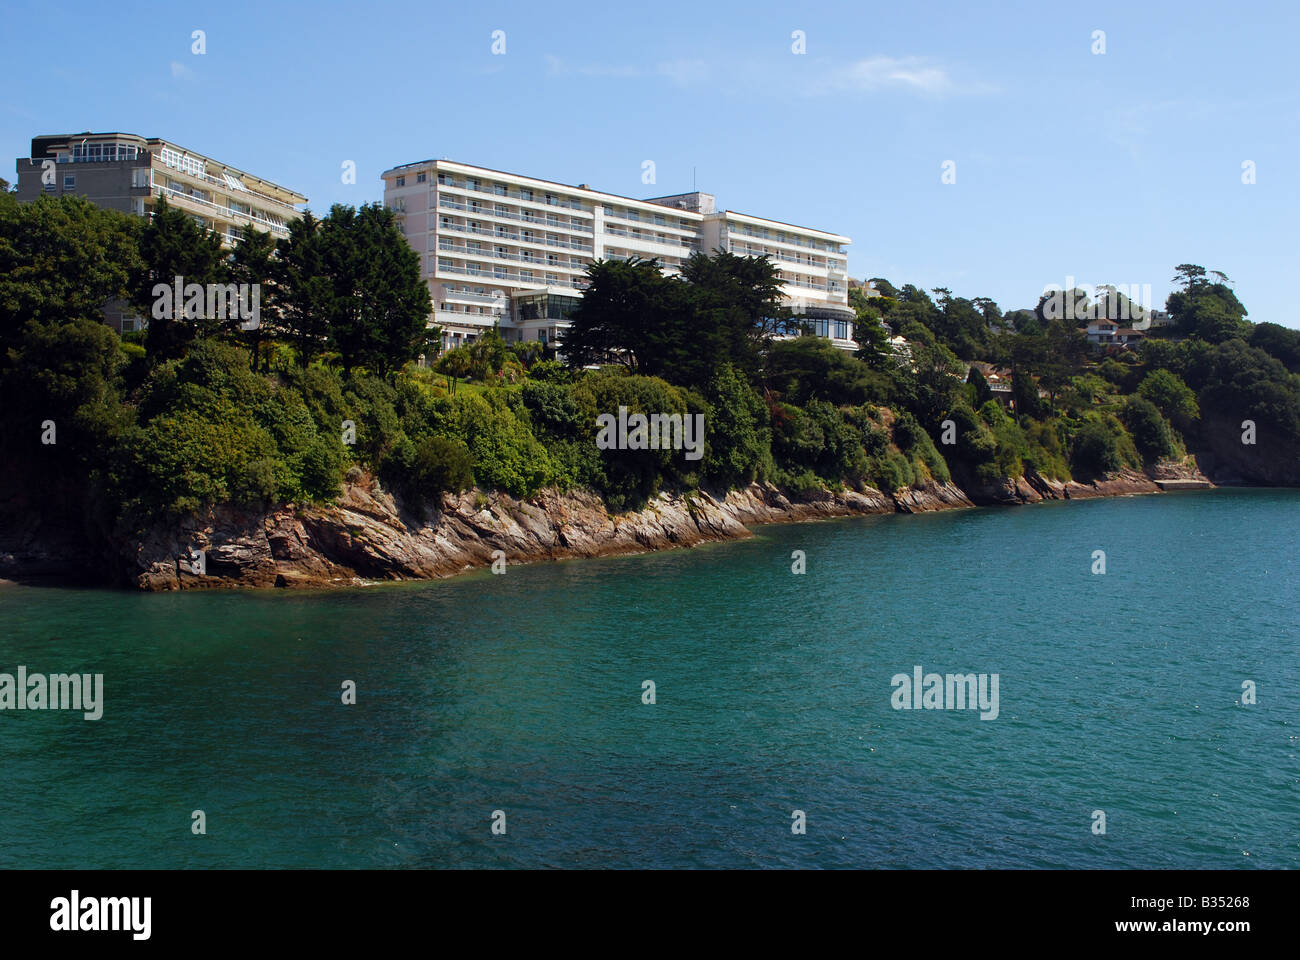 A view of the Imperial Hotel Torquay from the sea Stock Photo